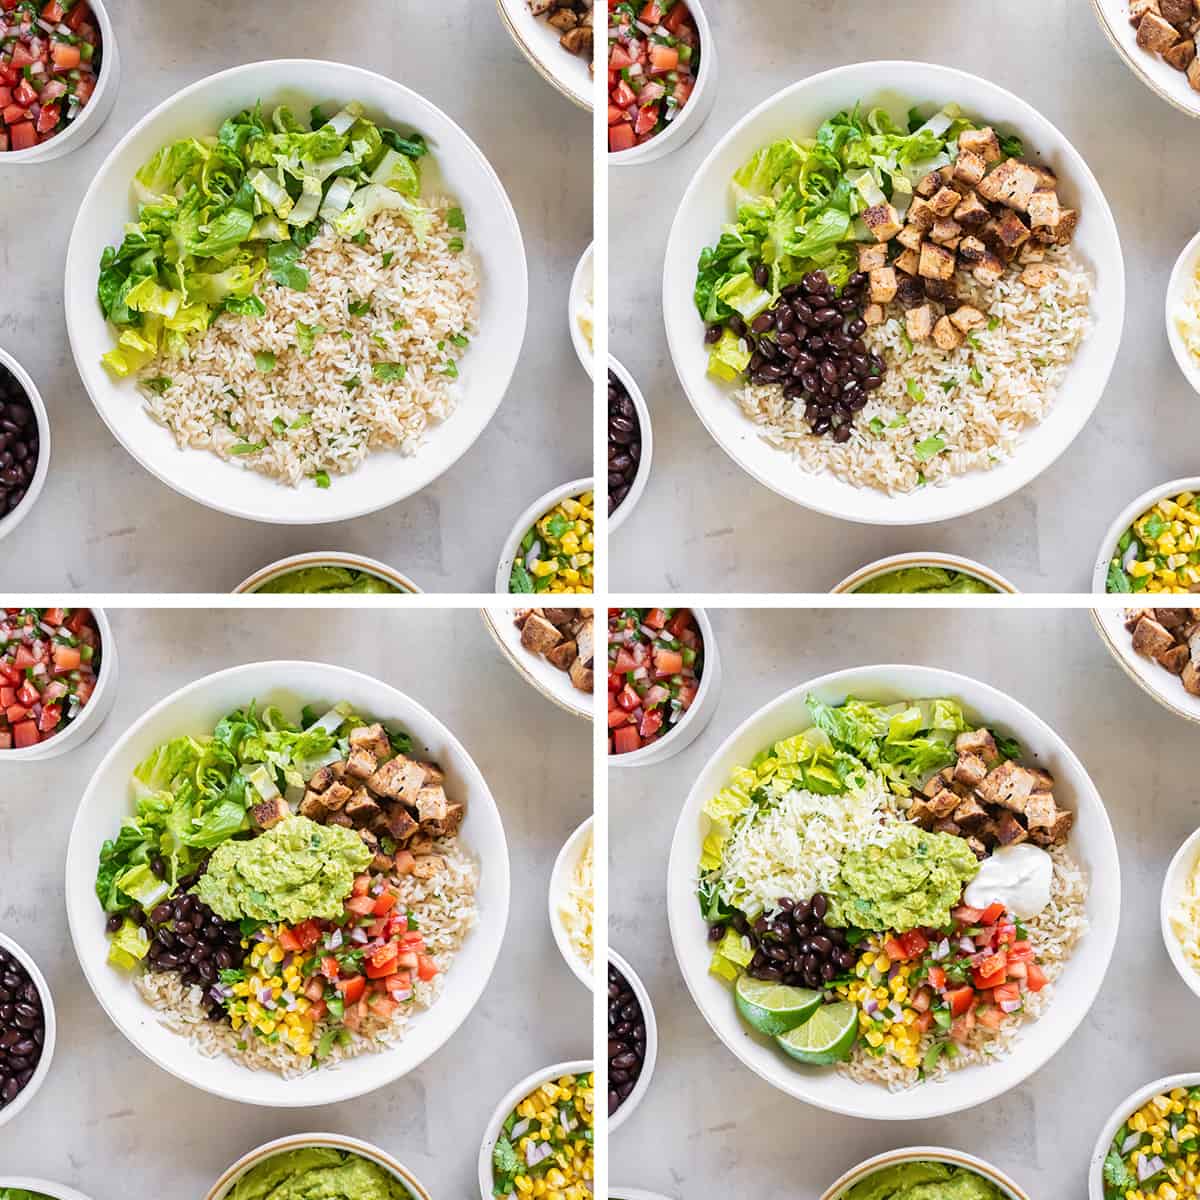 Four images showing a burrito bowl being assembled in a white bowl.